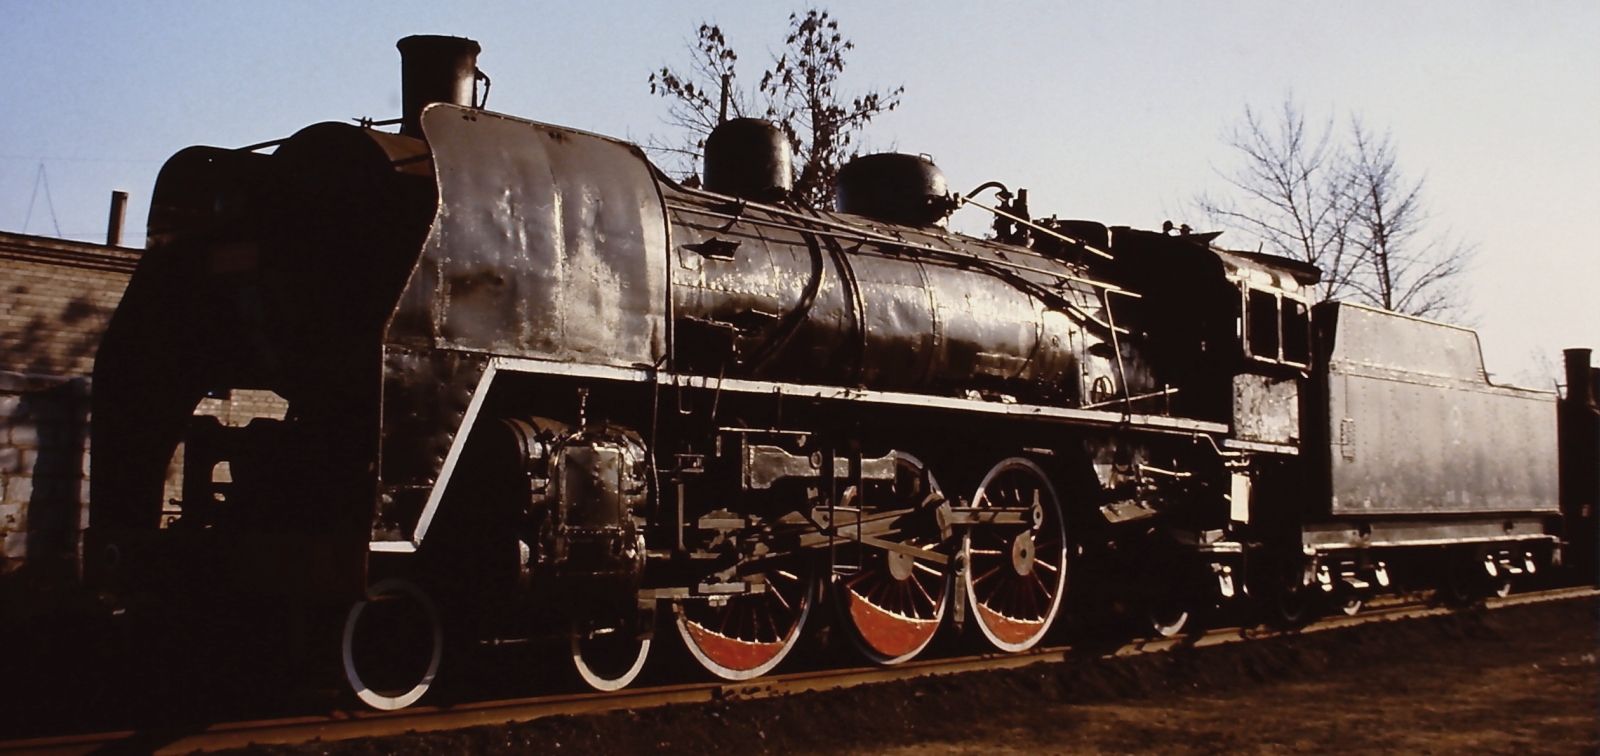 No. 292 in the Shenyang Steam Locomotive Museum